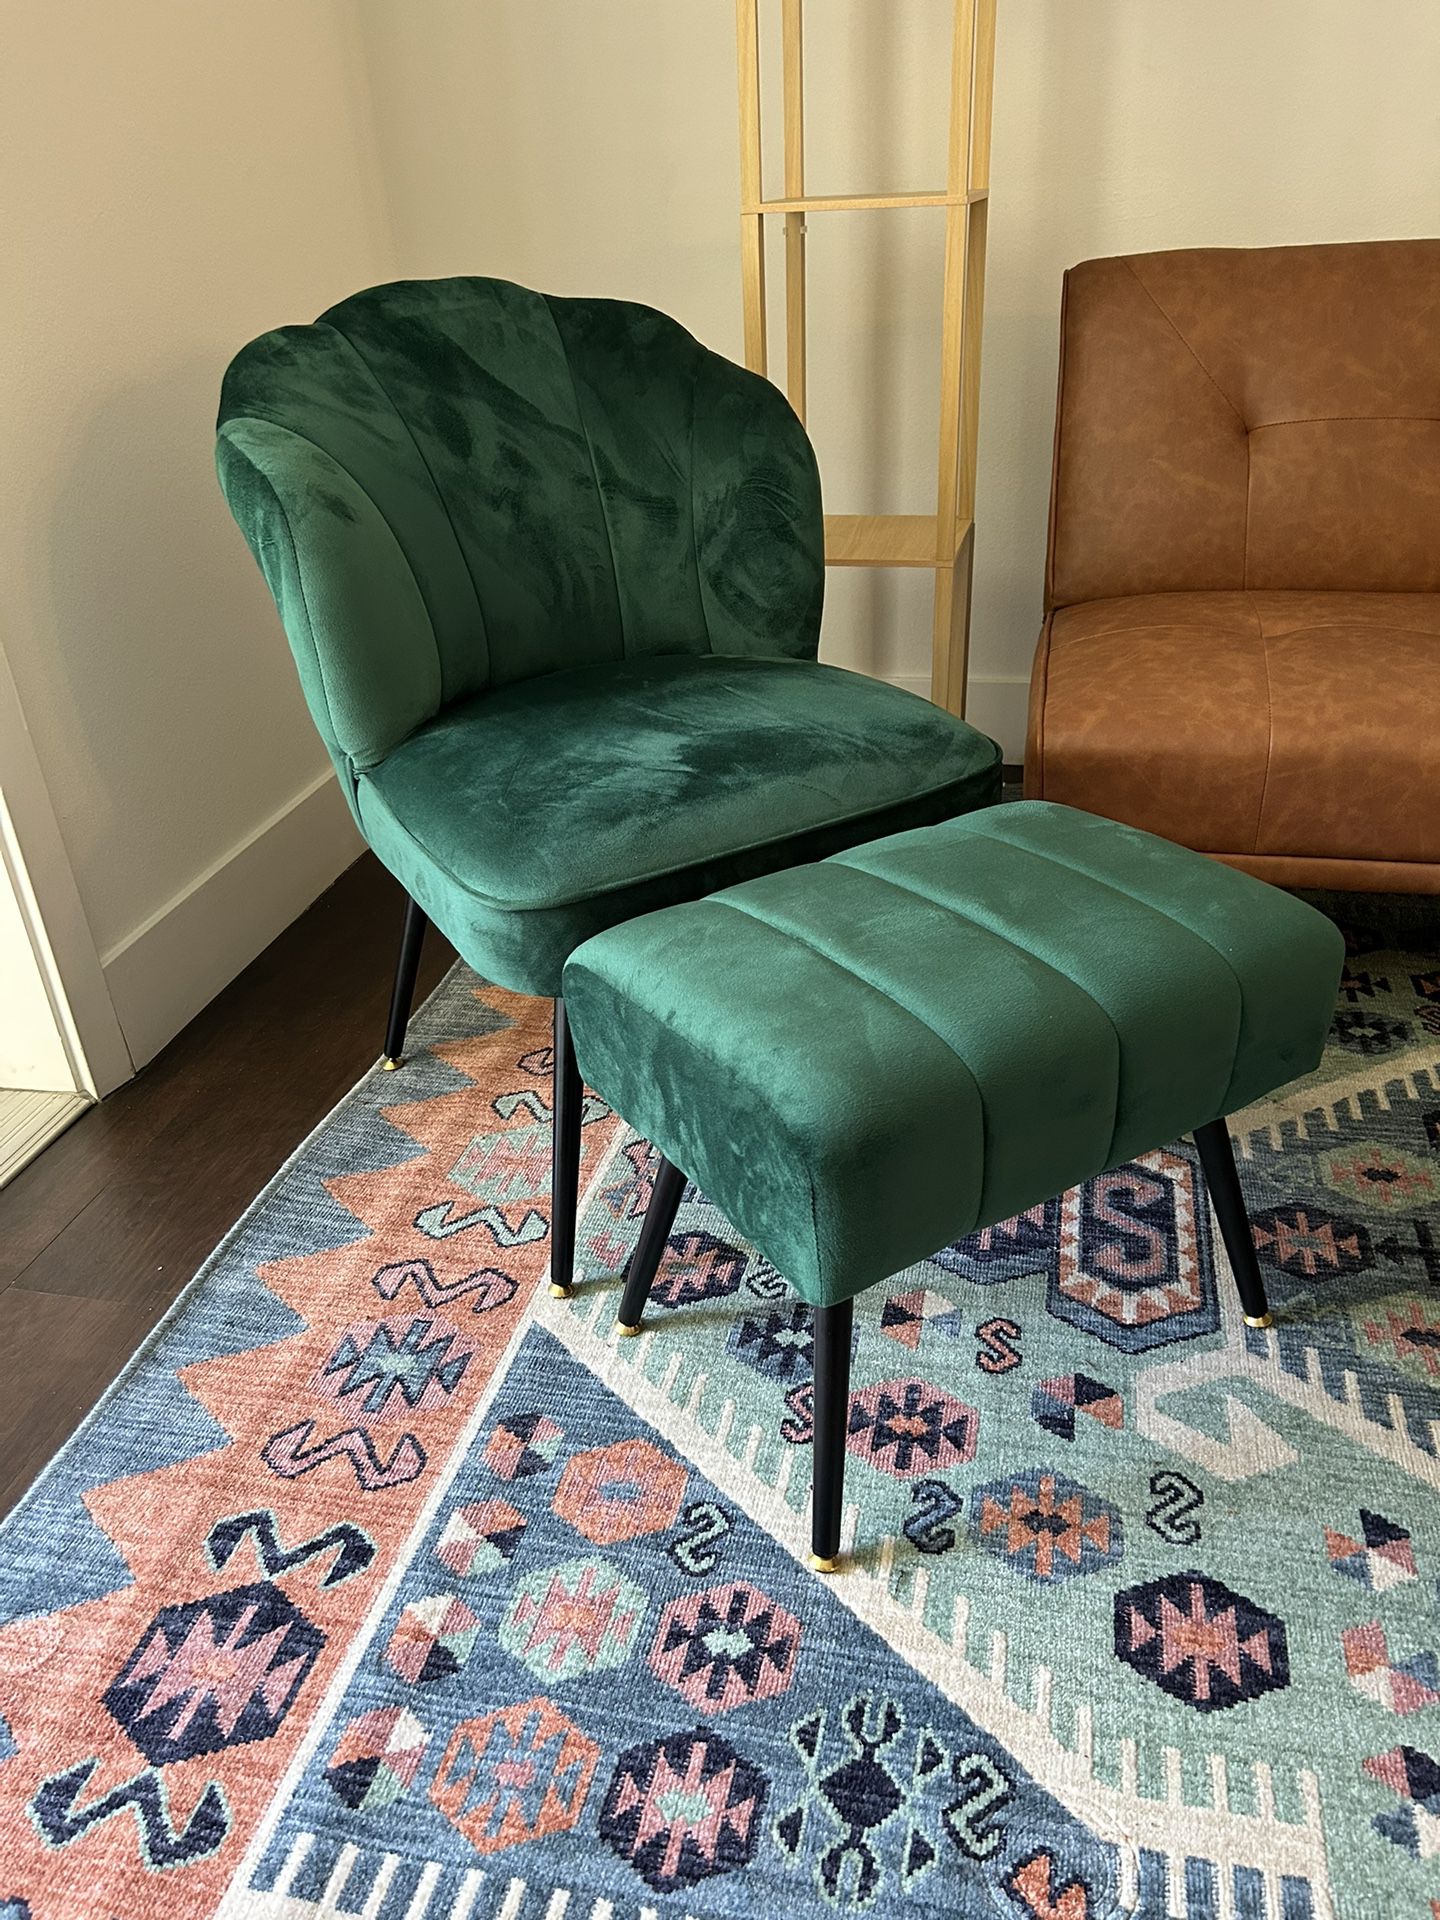 Green Suede Chair 